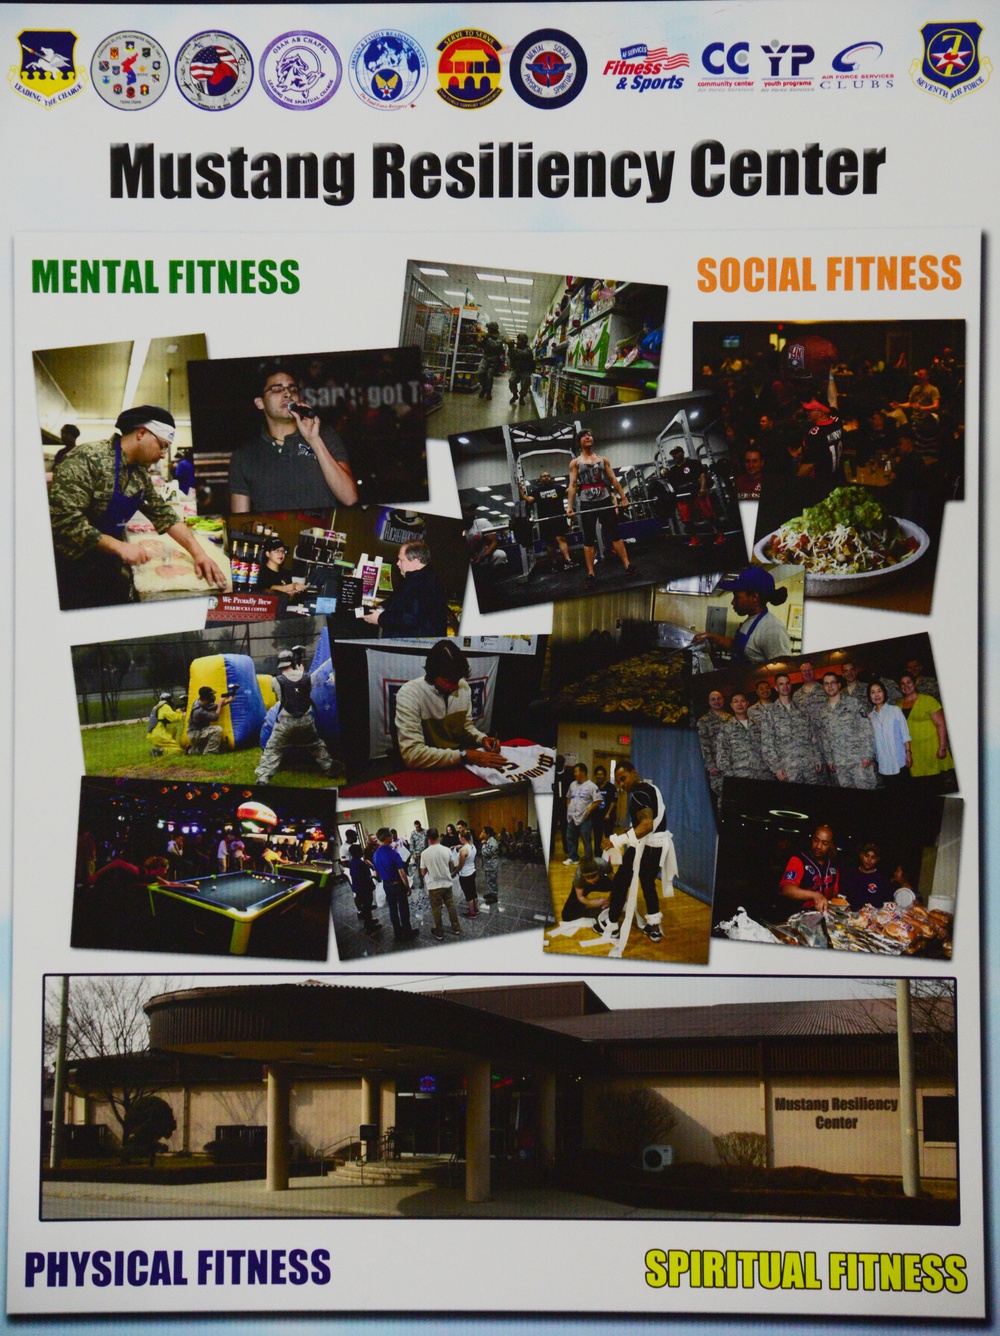 Mustang Resiliency Center